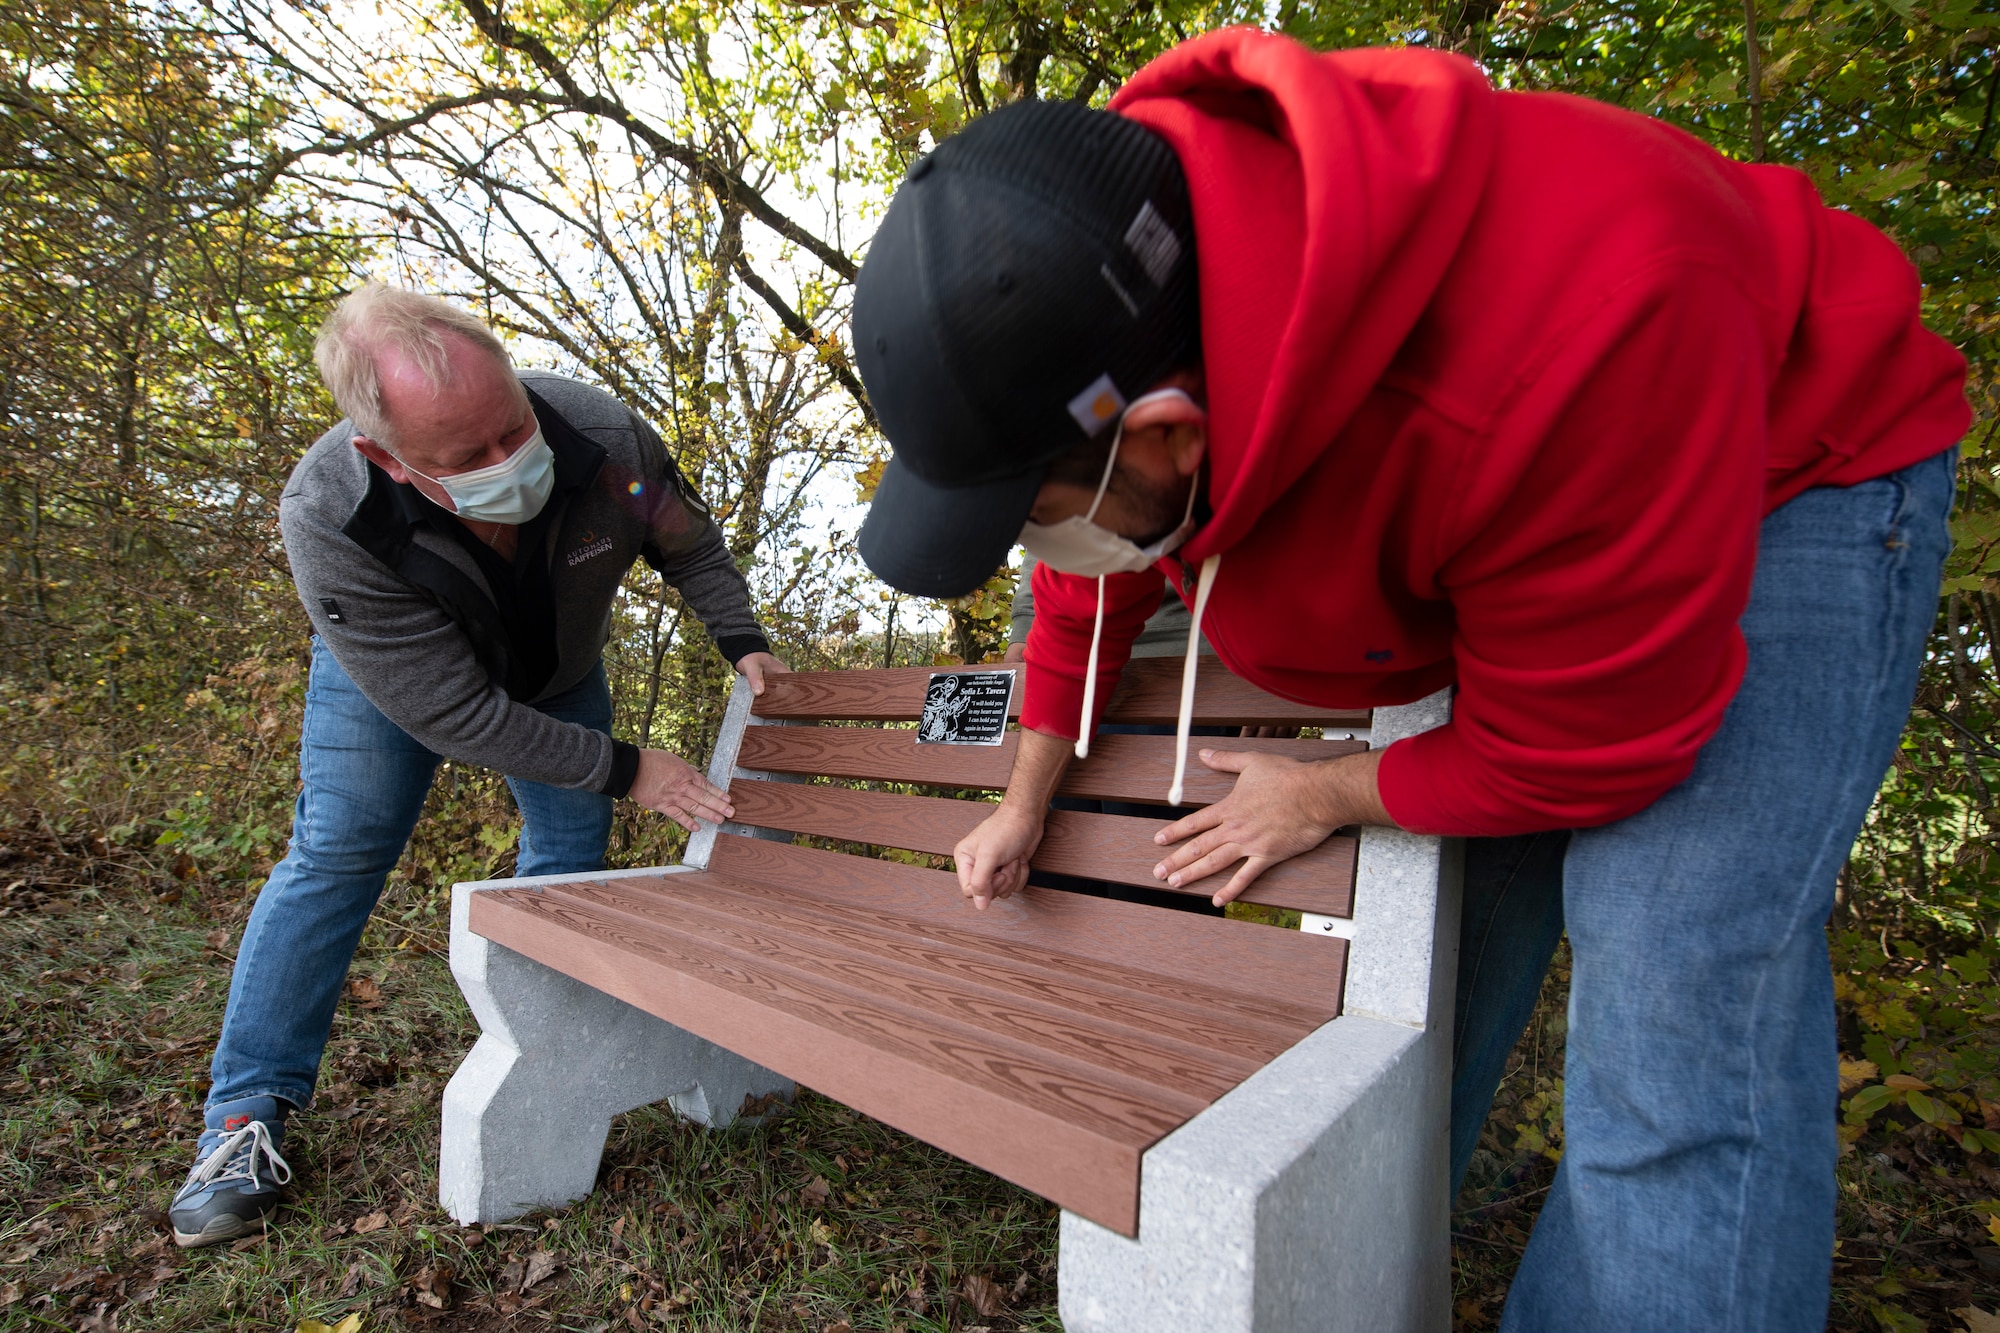 It was along the side of a small road in Binsfeld, among the newly fallen leaves and the cool, autumn air that Liliana, her husband, Javier, and several family members began constructing a bench Oct. 10